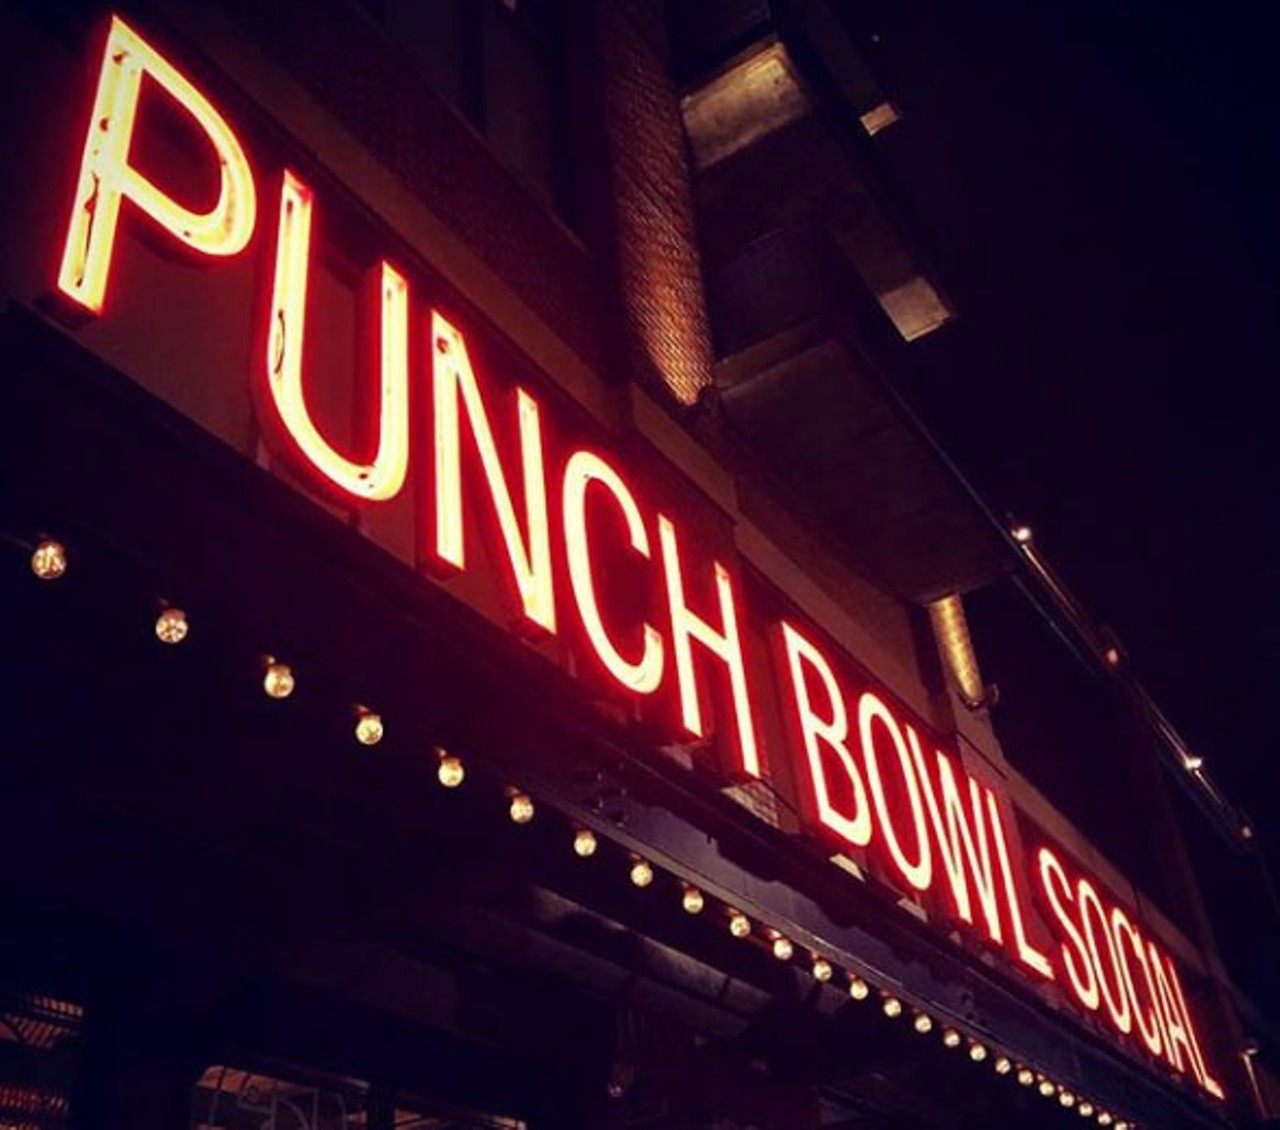 Punch Bowl Social
1086 W. 11th St., Cleveland
In addition to various forms of entertainment, Punch Bowl Social has private karaoke for those who want to celebrate a night by singing. One to four guests is $25/hour, and five to 10 guests is $35/hour.